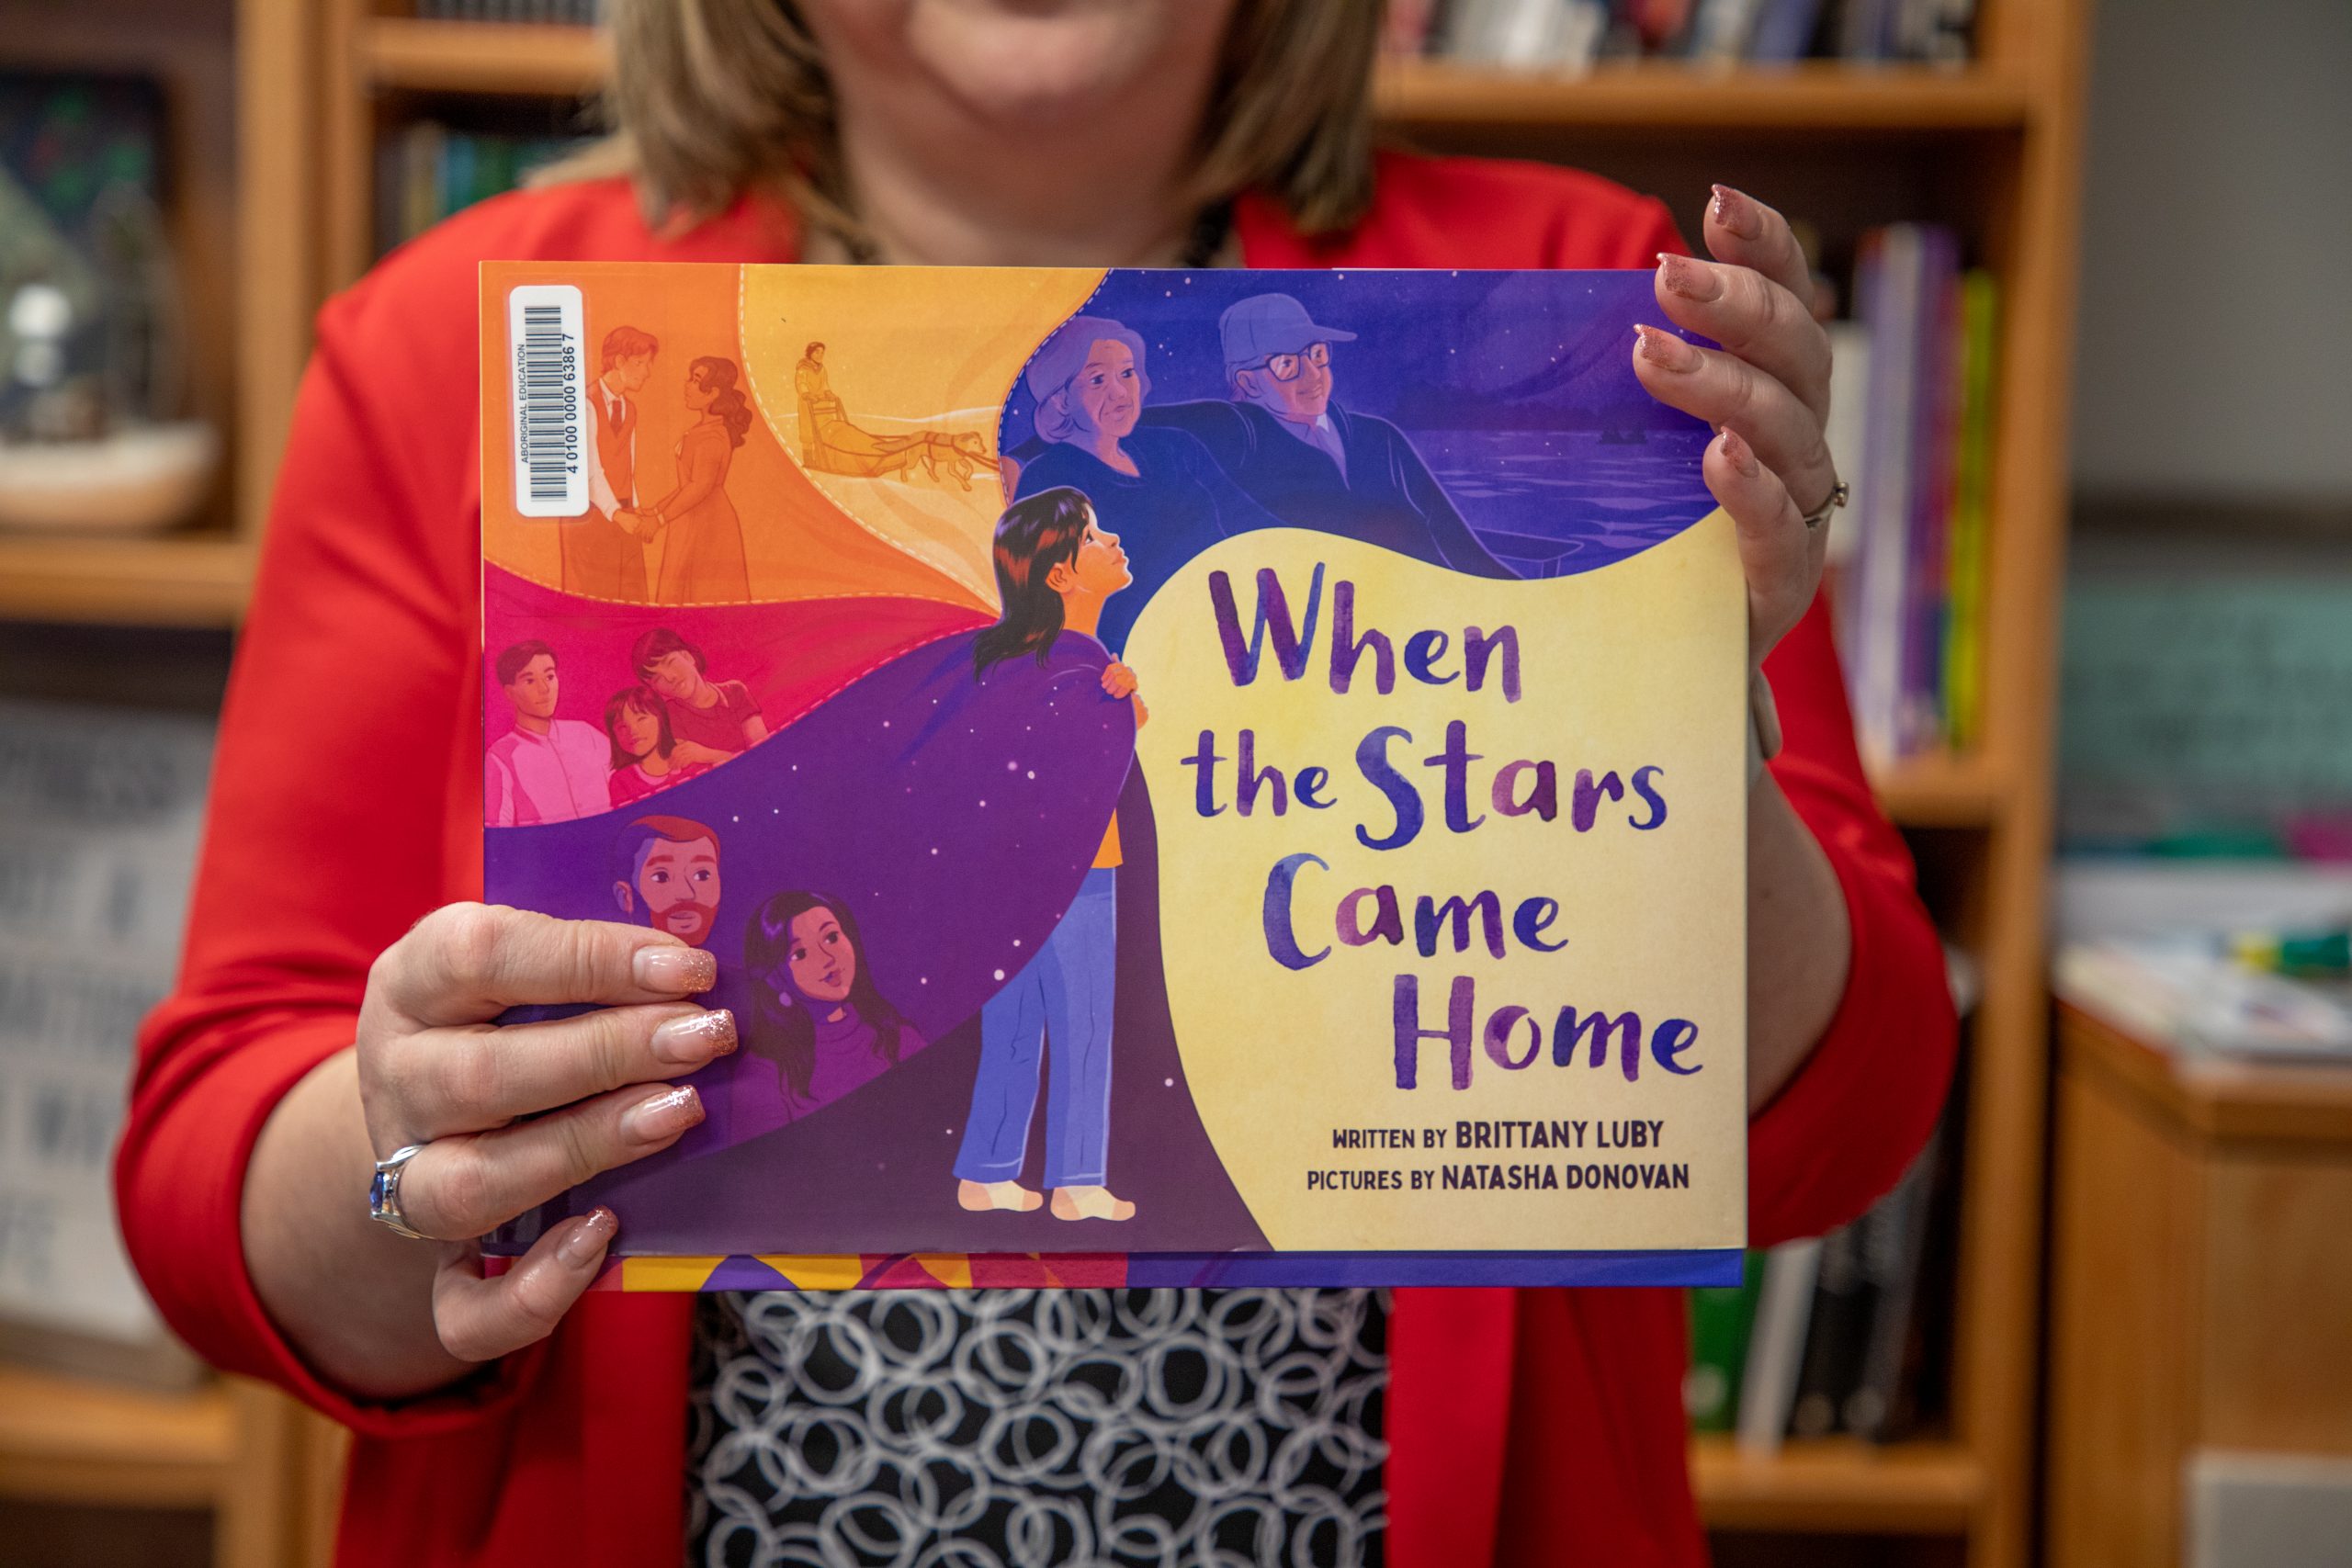 Cover of the book, "When the Stars Came Home" by Brittany Luby.